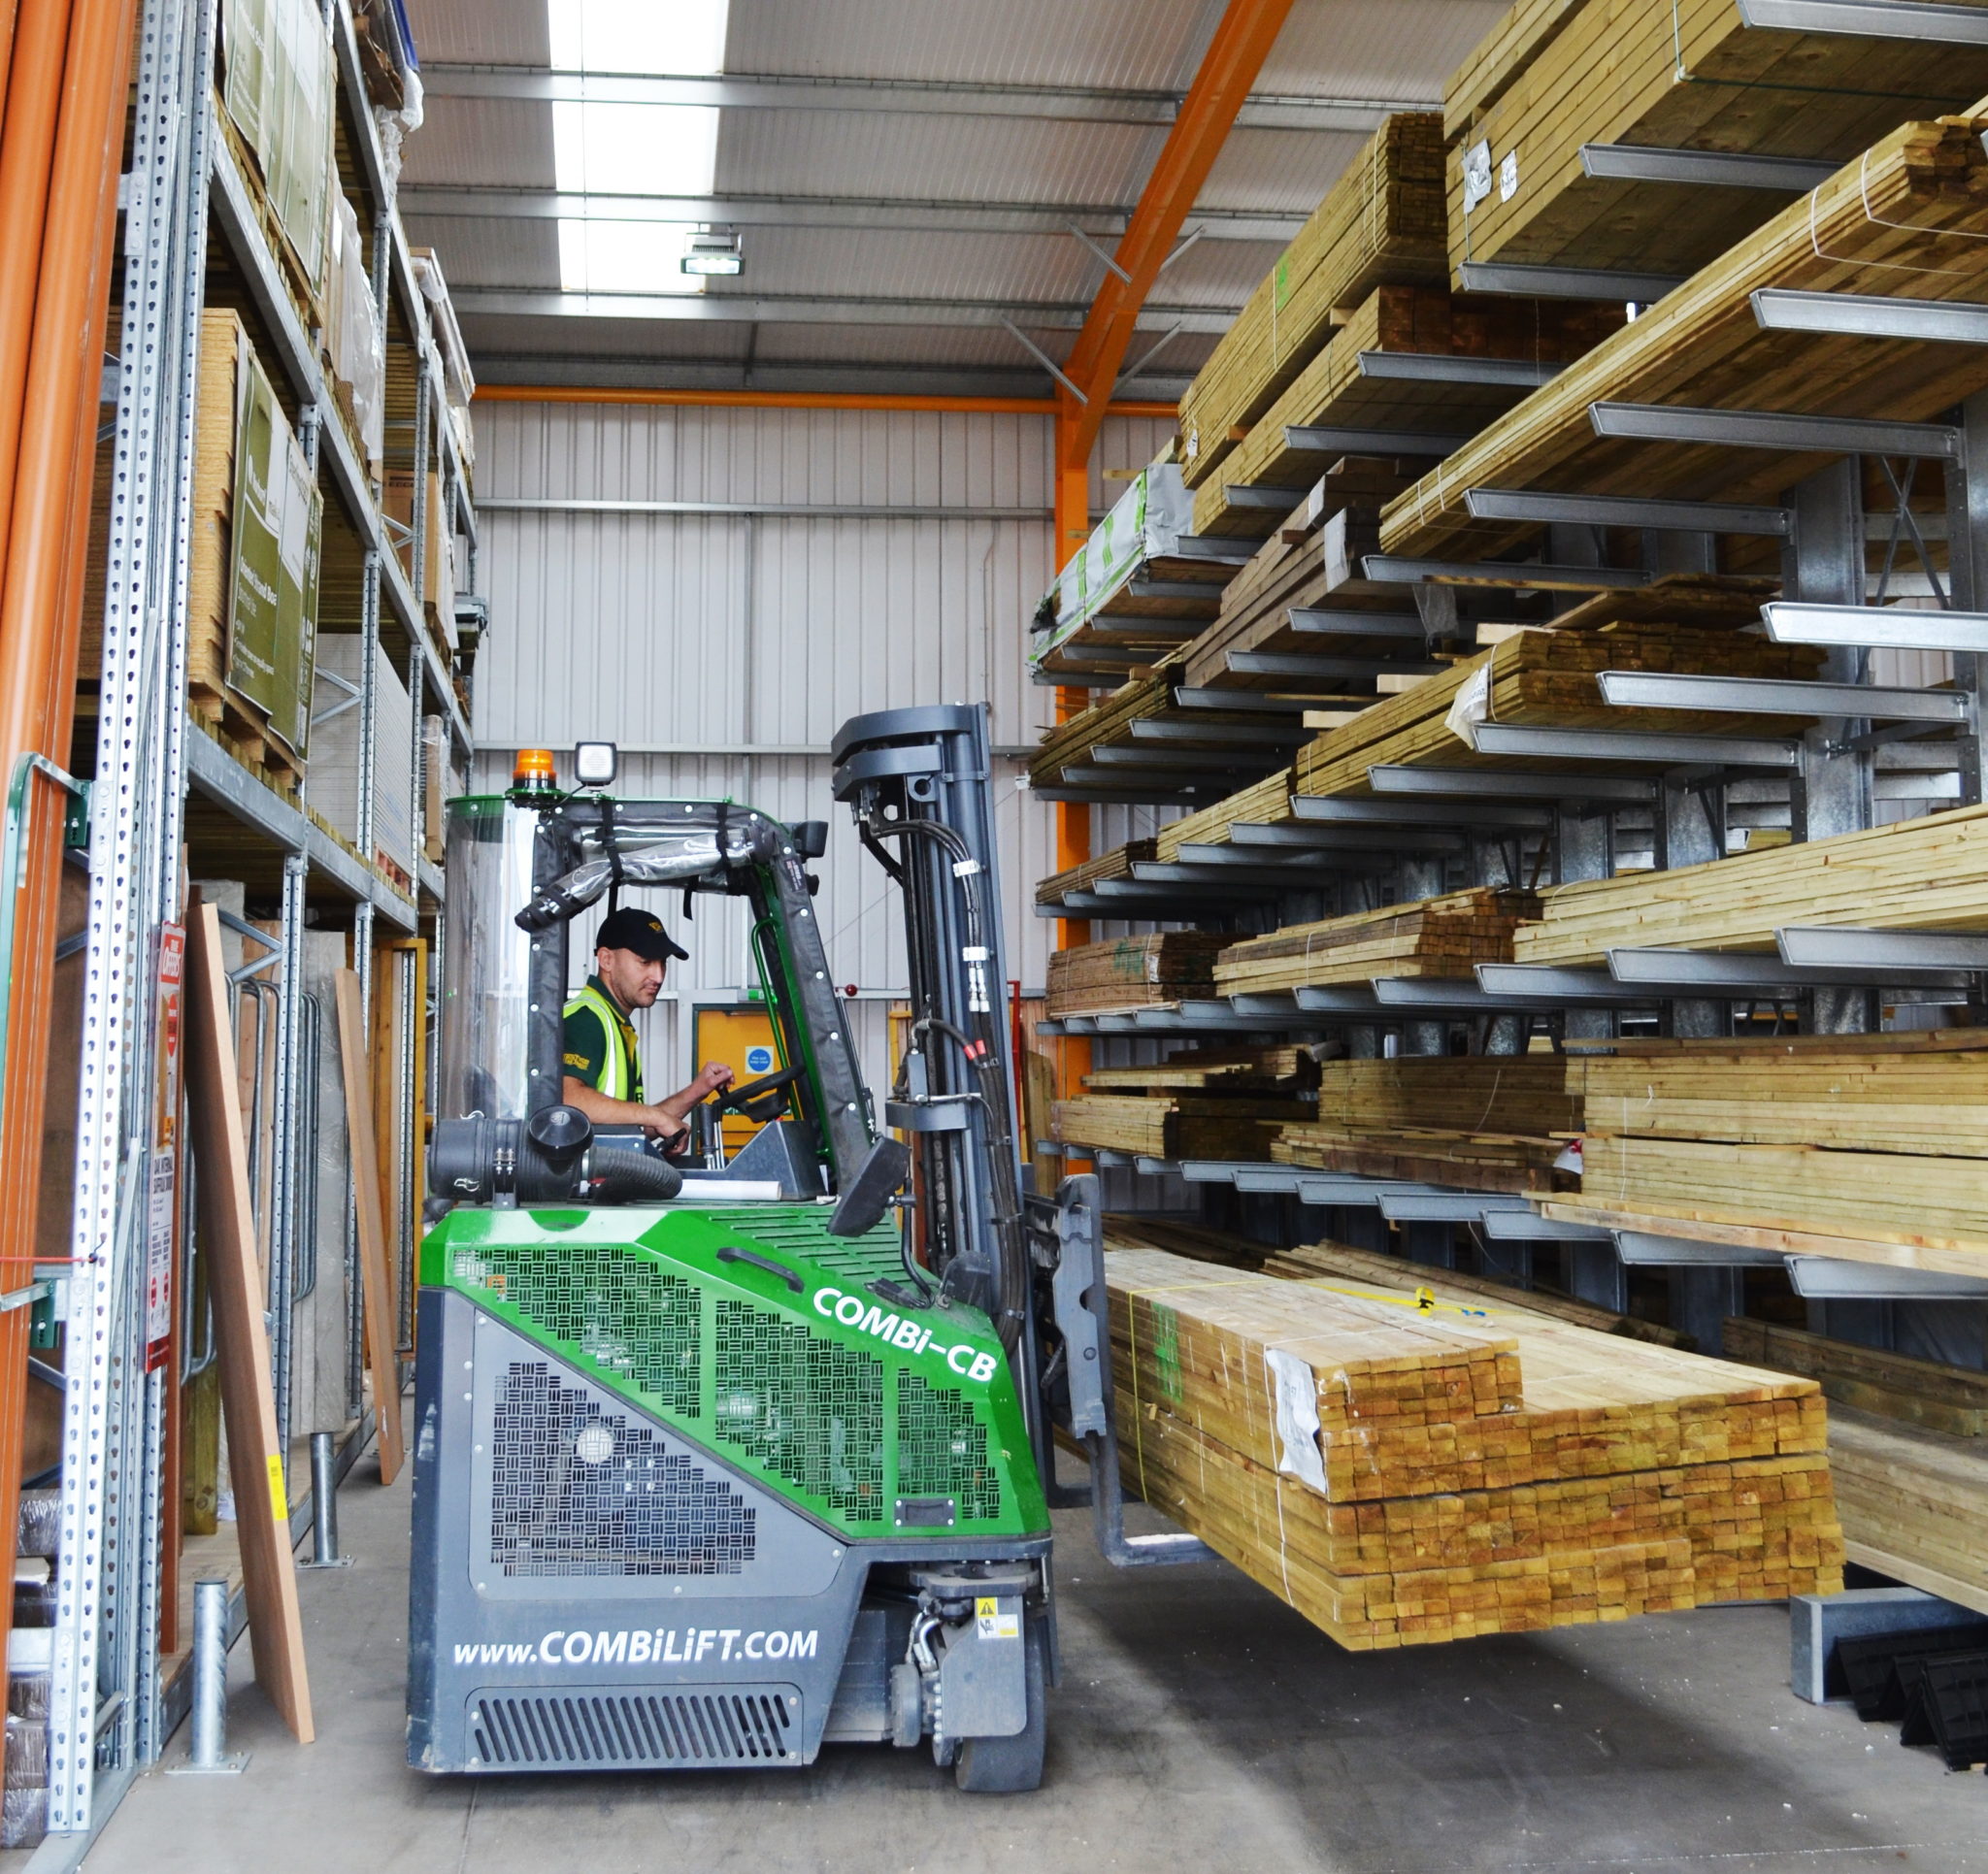 Combilift – COMBI CB – Multi Directional counterbalance forklift – handling long loads - Building Supply - DIY - Timber - Lumber - Aisle